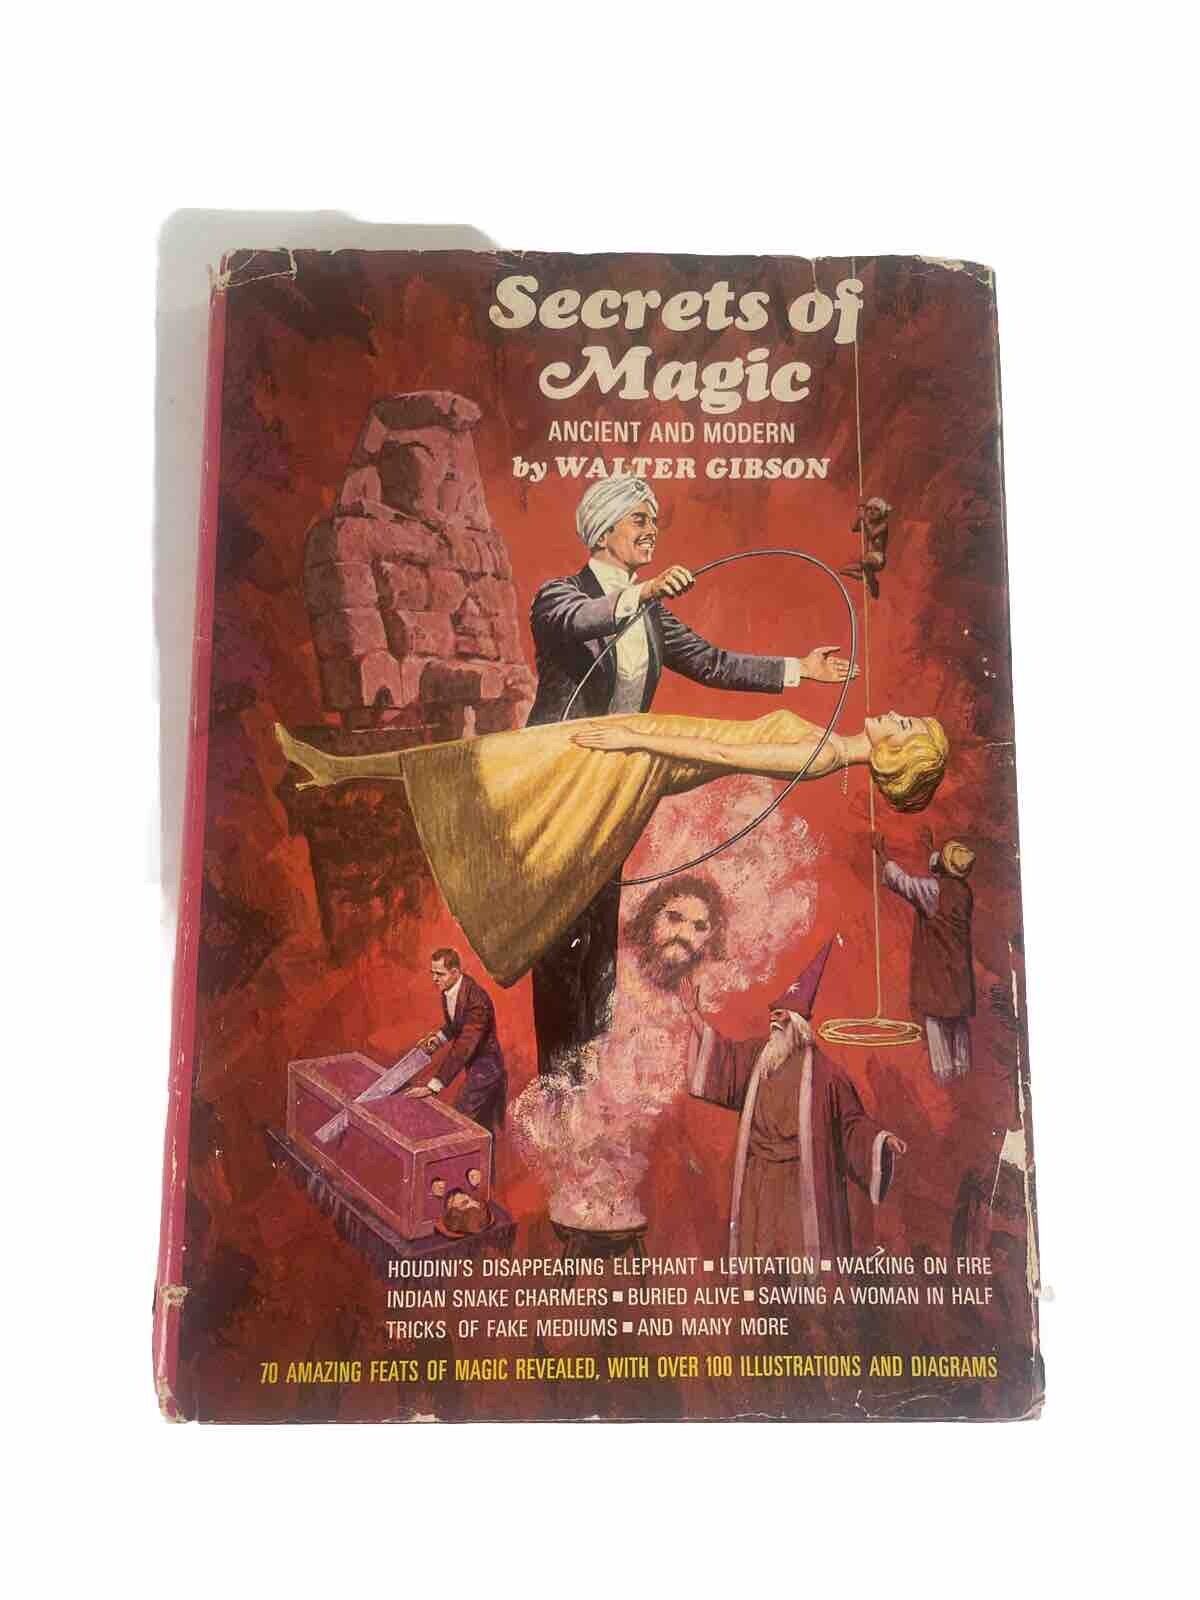 SECRETS OF MAGIC ANCIENT & MODERN, by Walter Gibson... 1967 Rare Very Good Cond